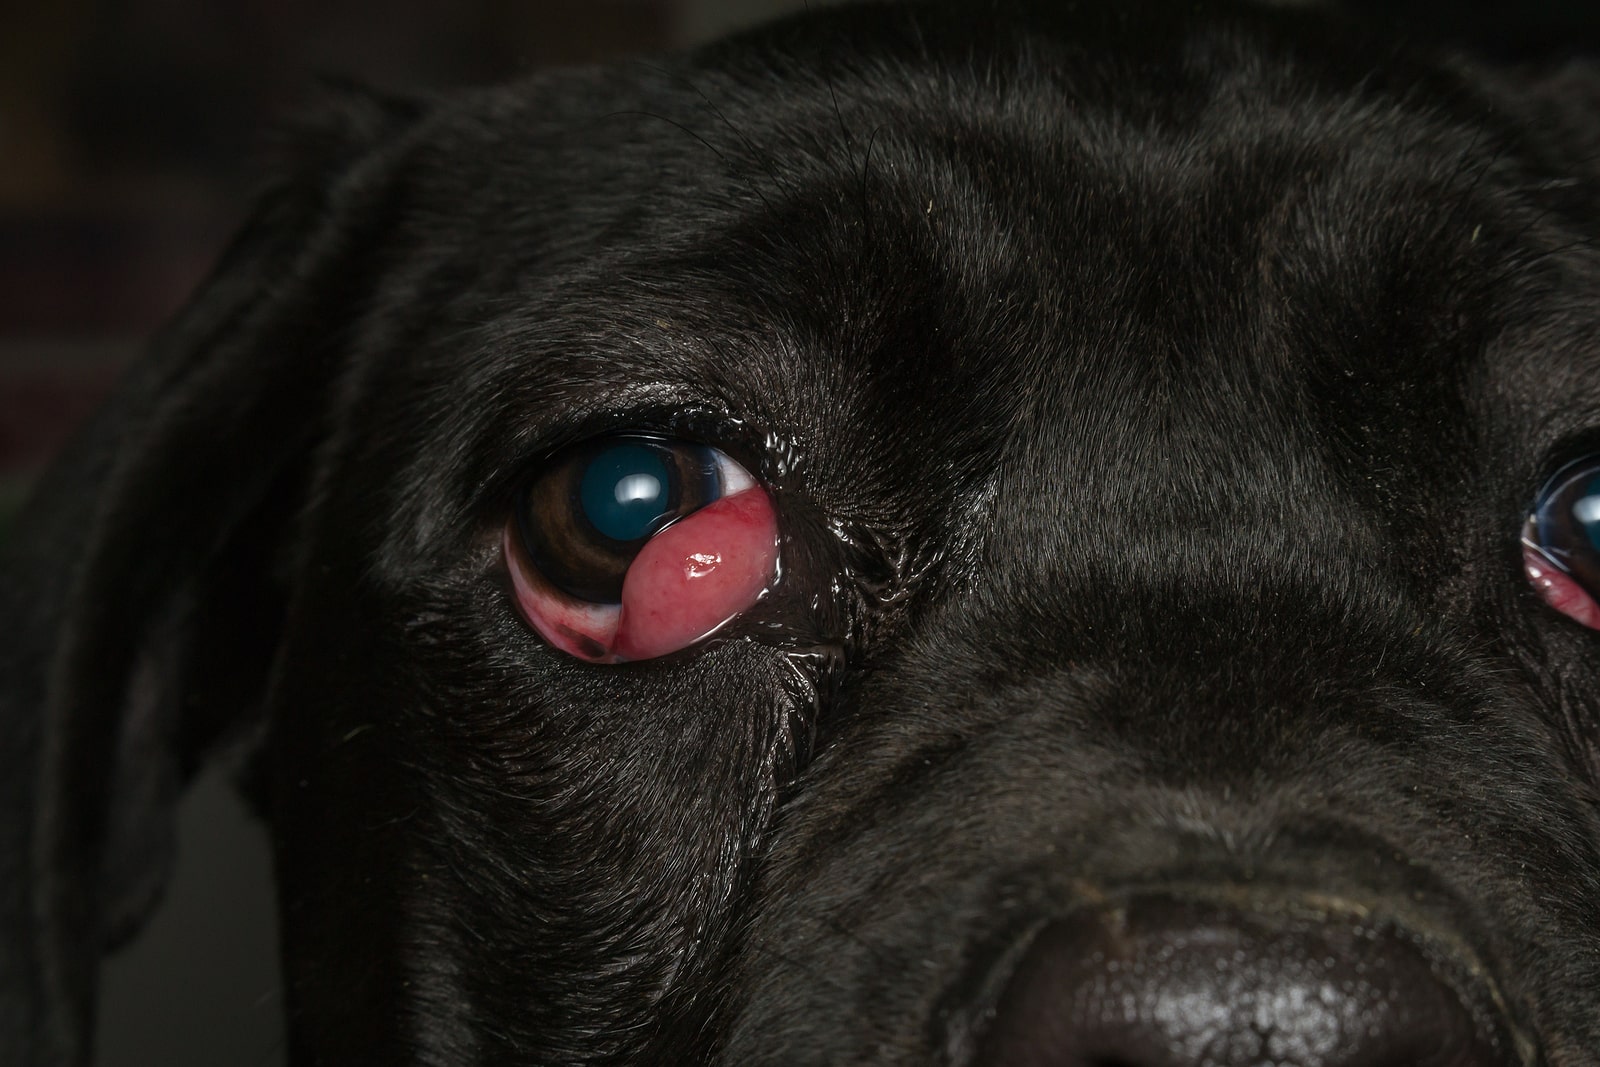 Is it better to remove cherry eye?